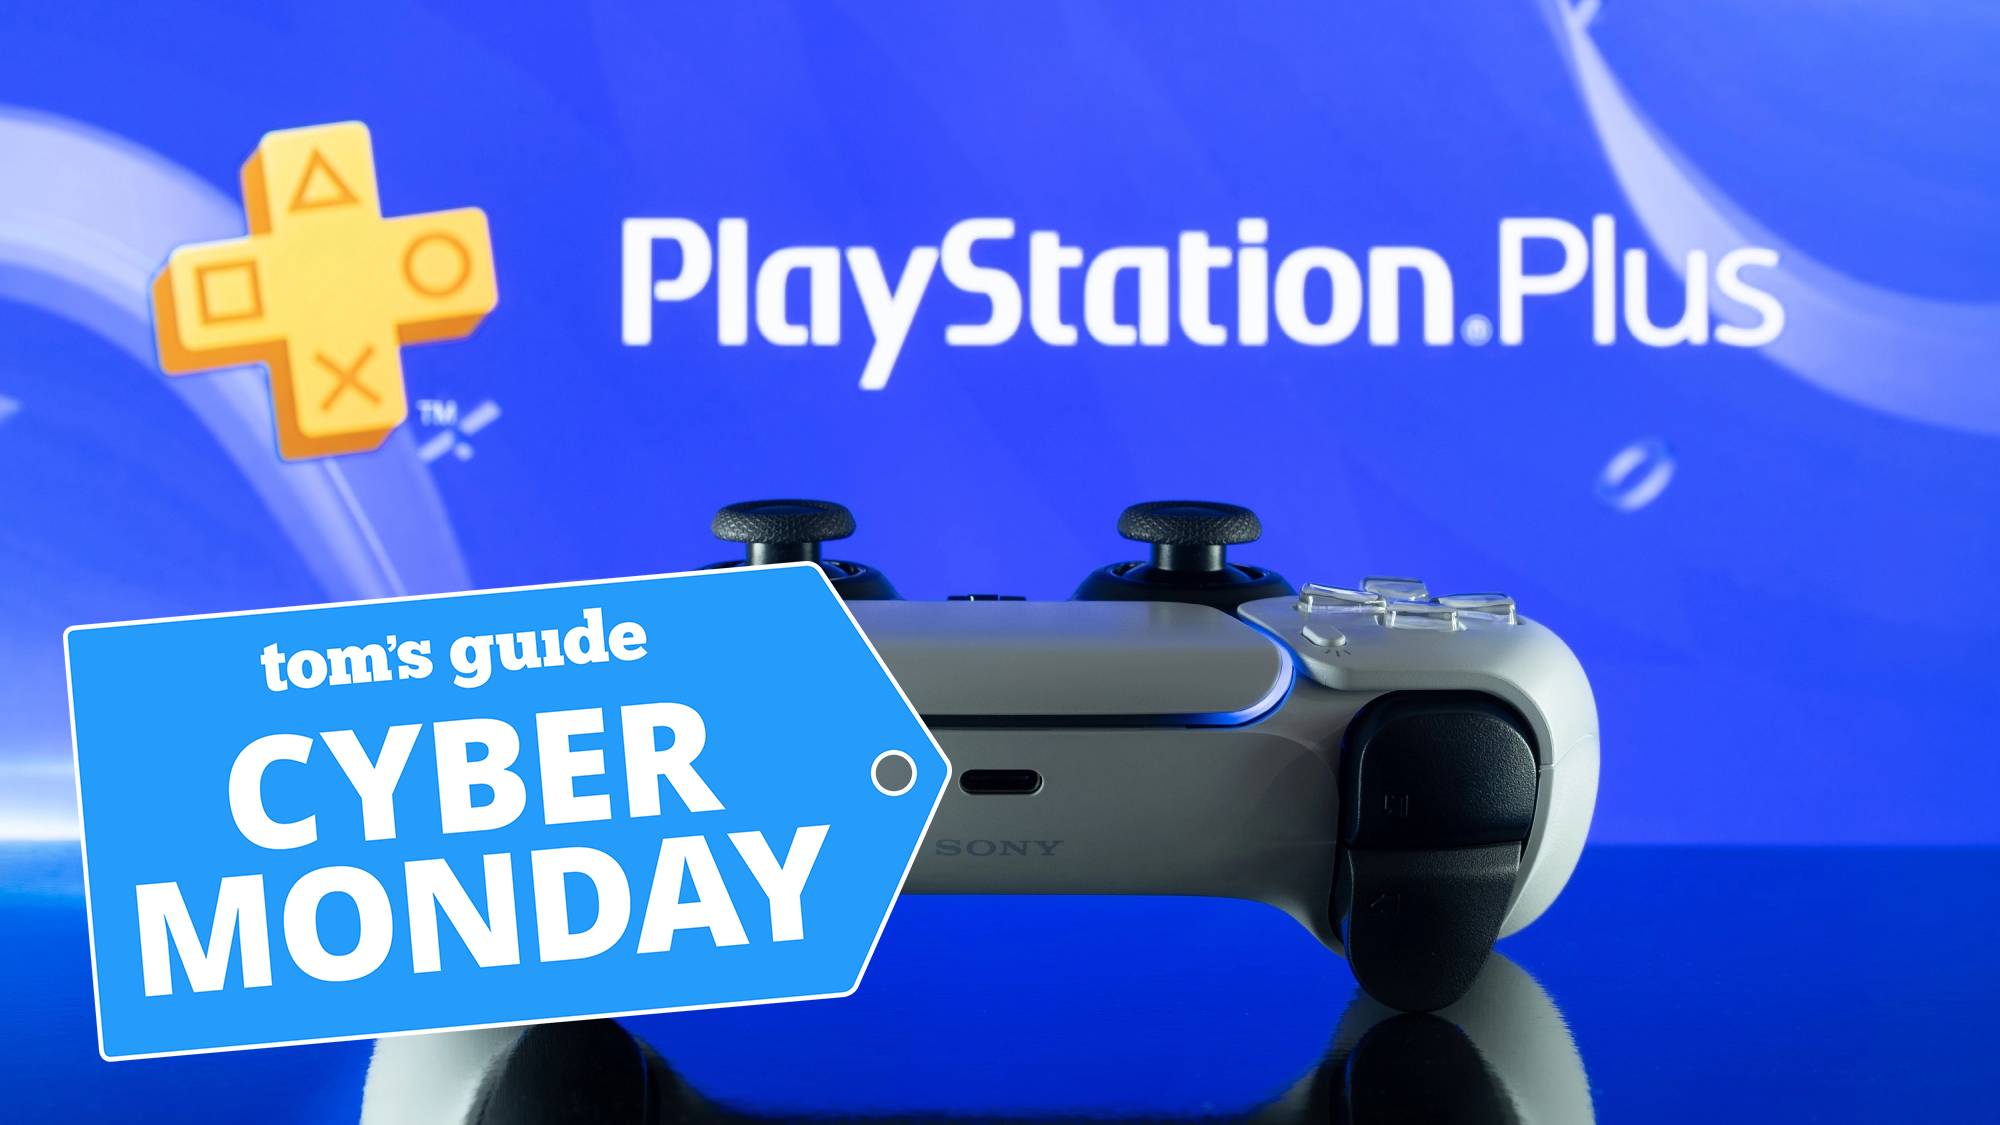 PlayStation Plus offer